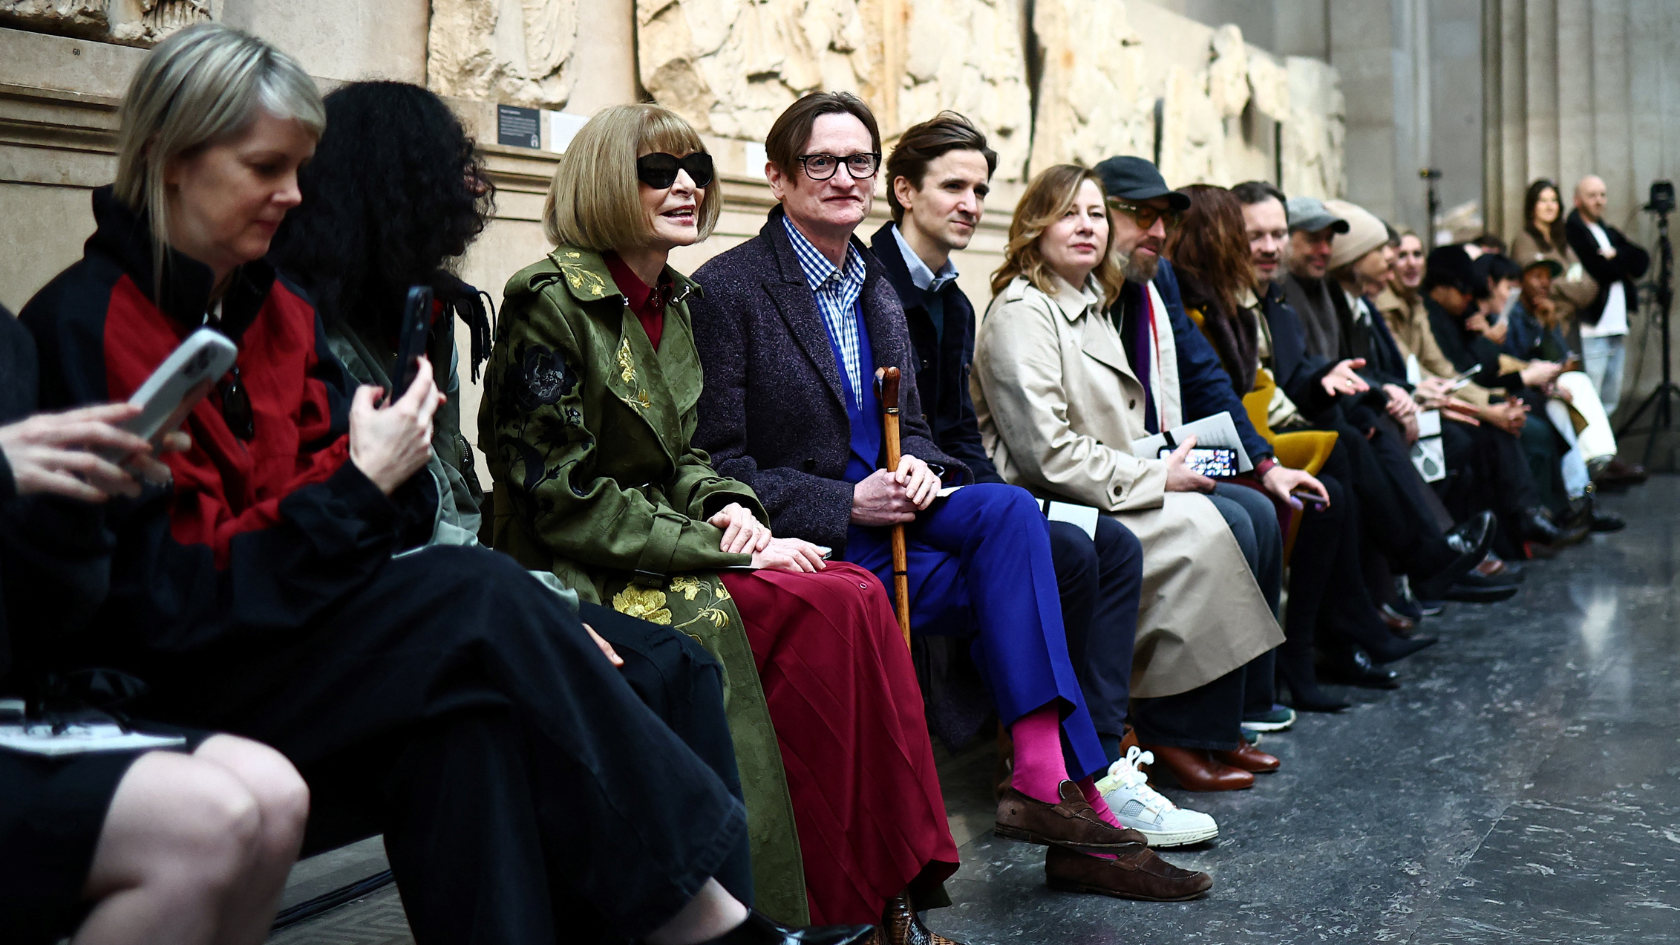 Vogue editor-in-chief Anna Wintour (dark glasses) sits in front of the Parthenon Marbles at the British Museum prior to the Erdem fashion show. /Henry Nicholls/AFP